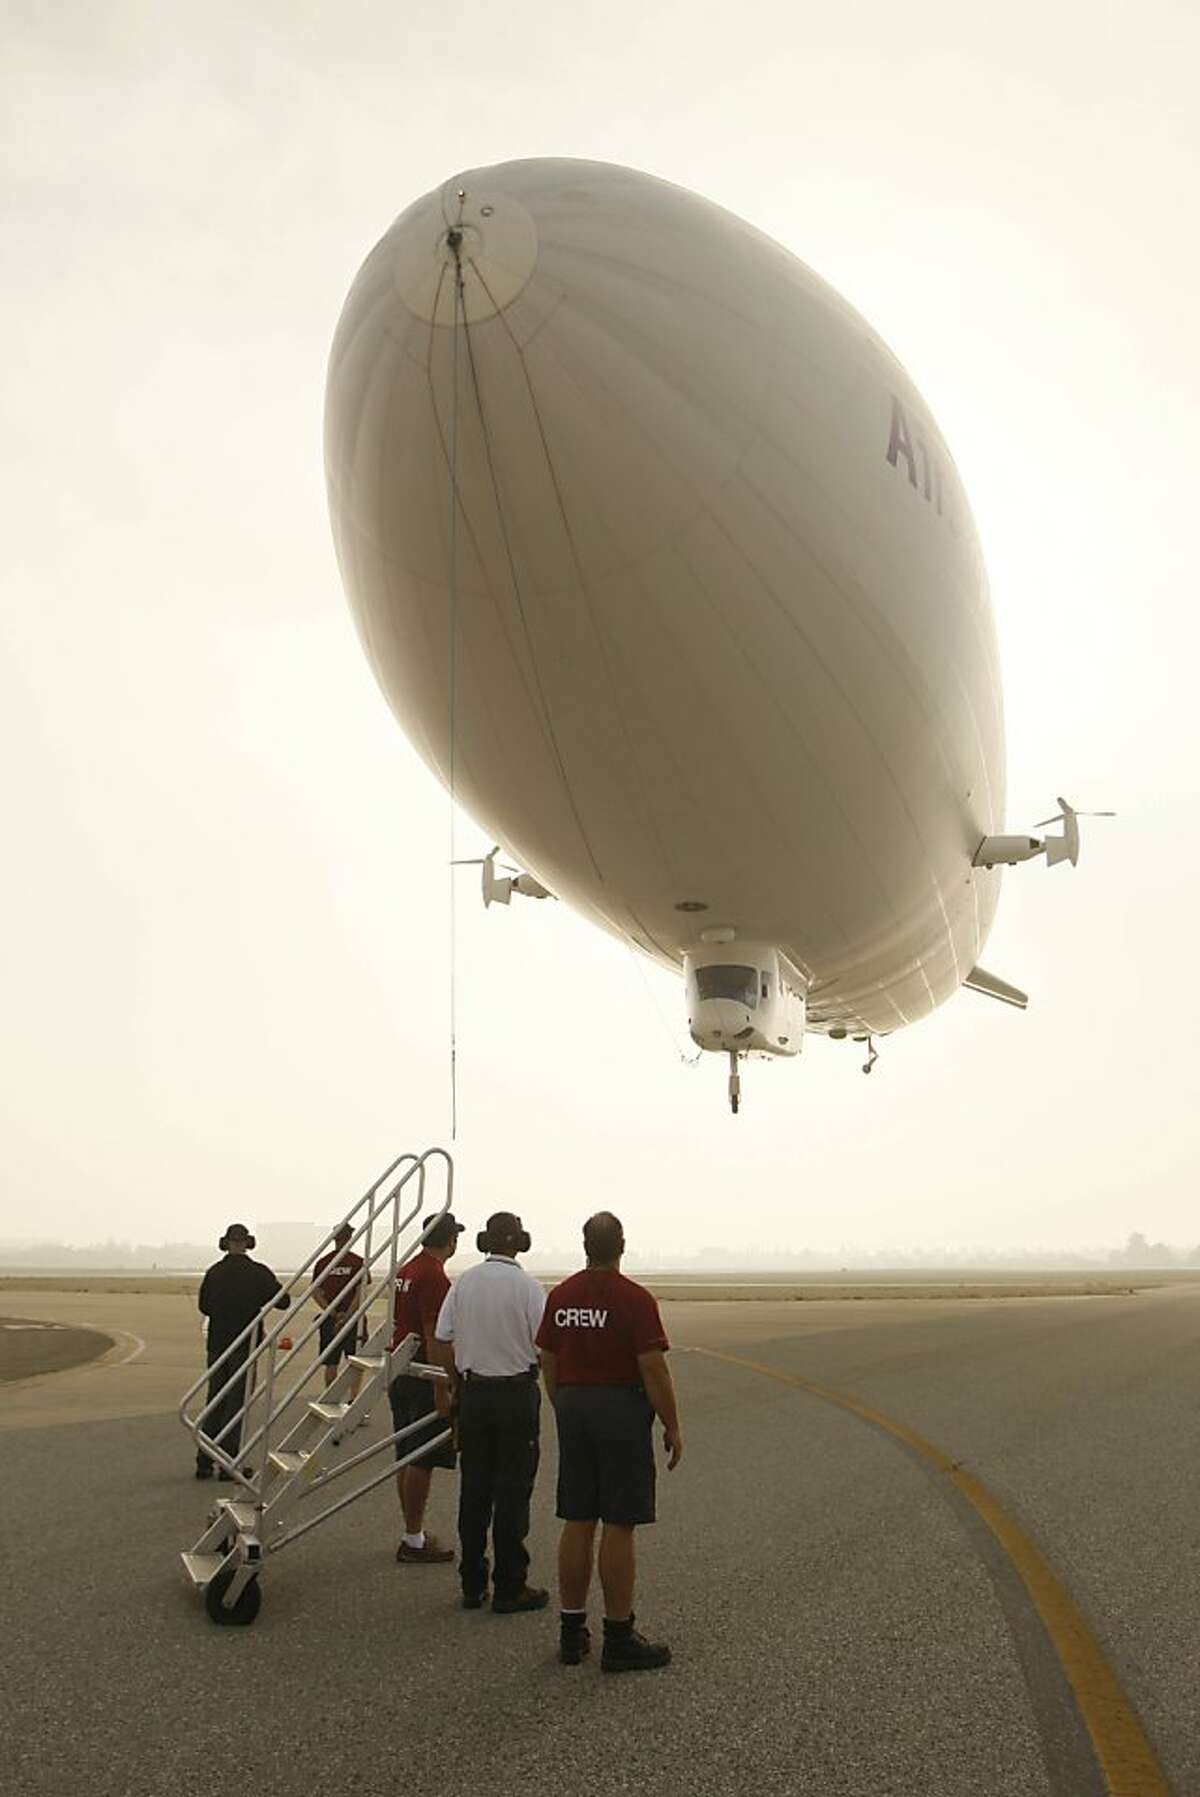 The ground crew prepares for the Zeppelin NT's landing at Moffet Field on Monday, October 27, 2008 in Mountain View, Calif.